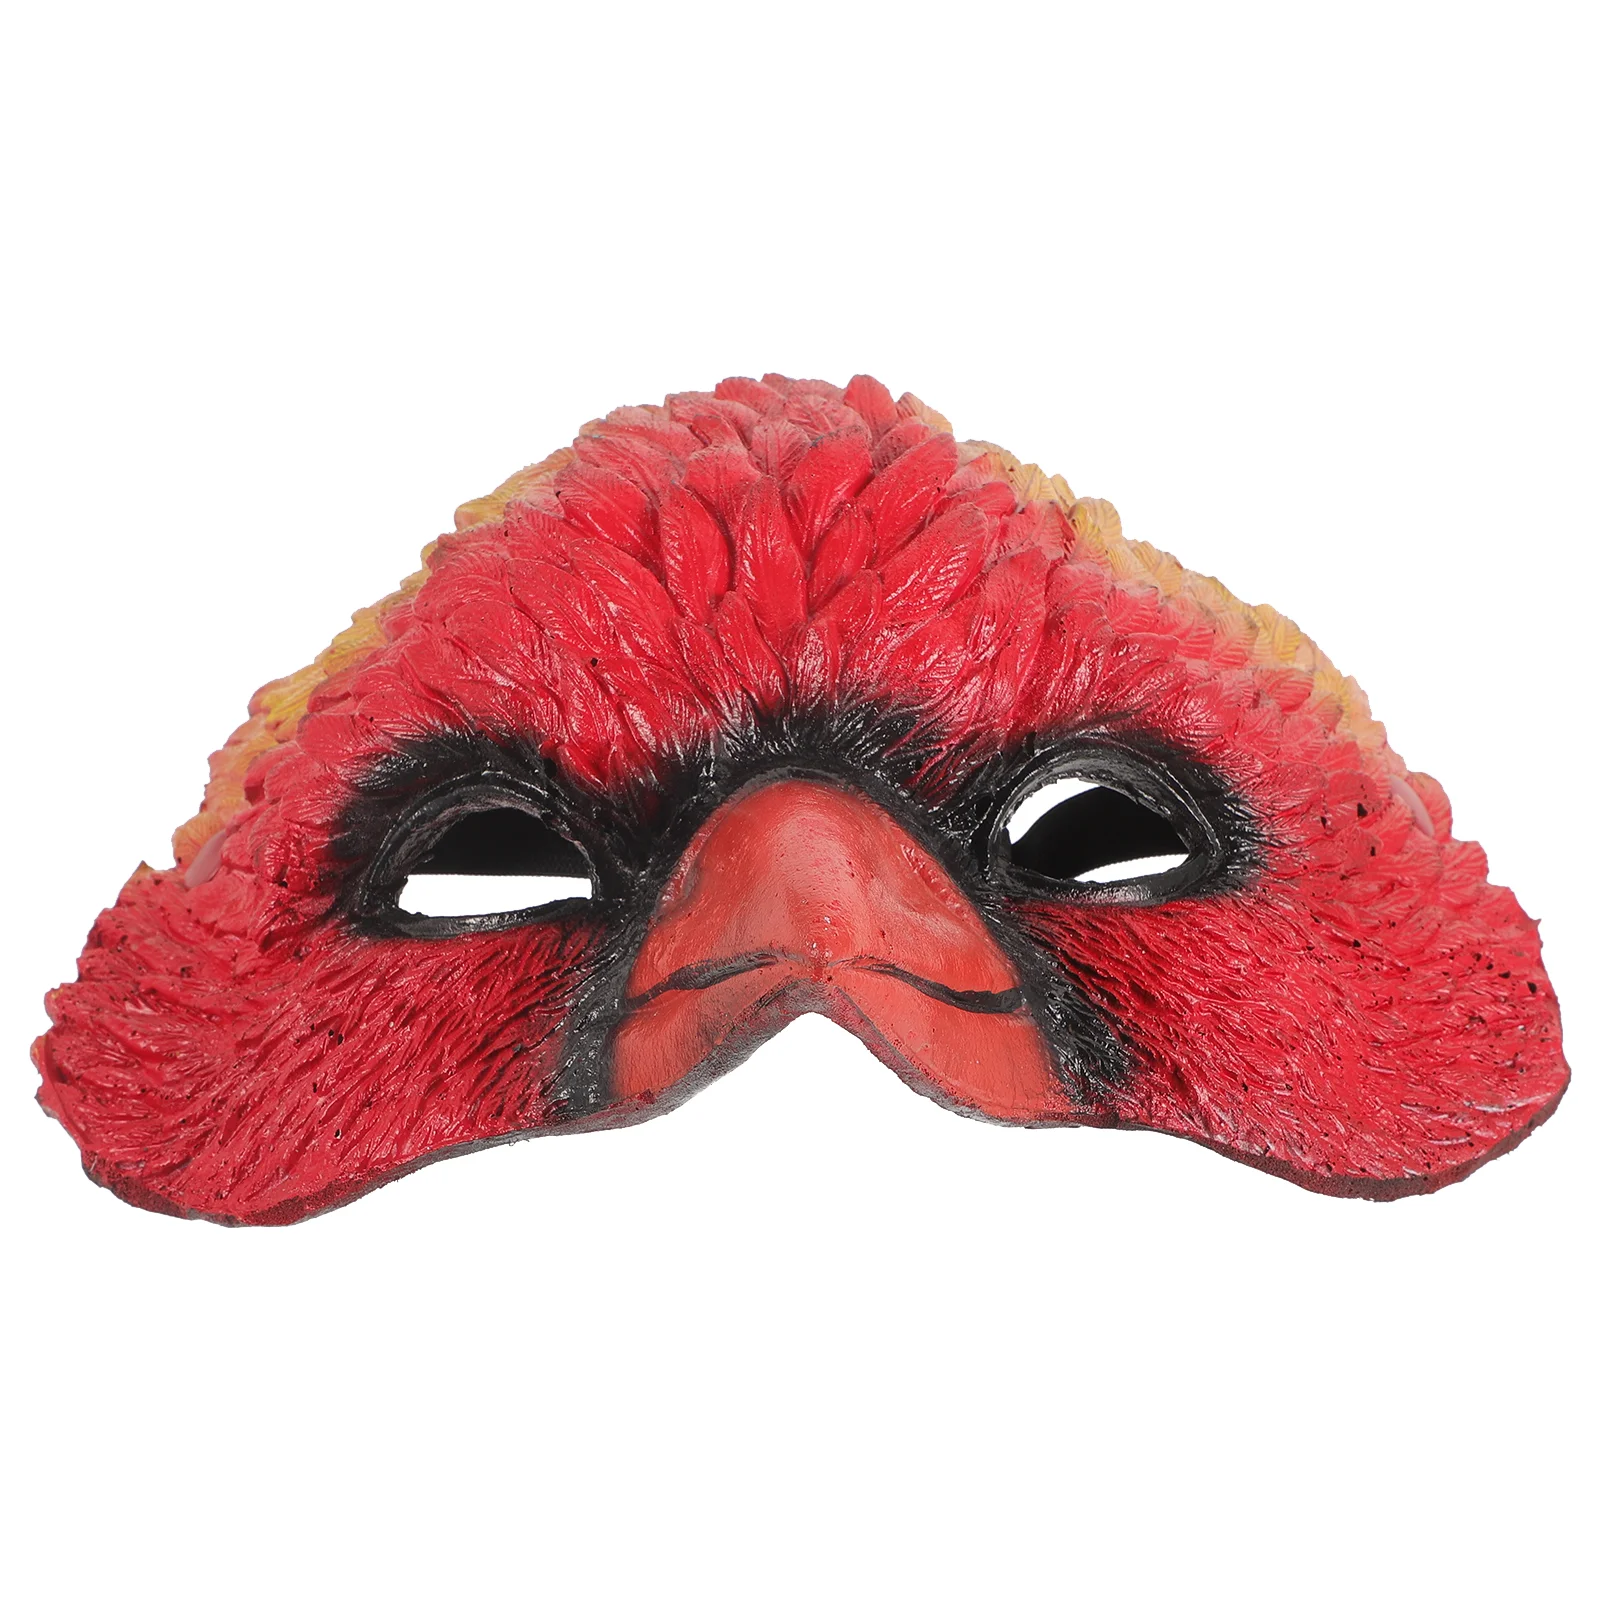 Bird Head Mask Role Play Outfits Make up Face Animal Masks for Party Pu Foam Cosplay Costume rolecos game genshin impact yoimiya cosplay costume yoimiya cosplay role play halloween costume for women outfits full set